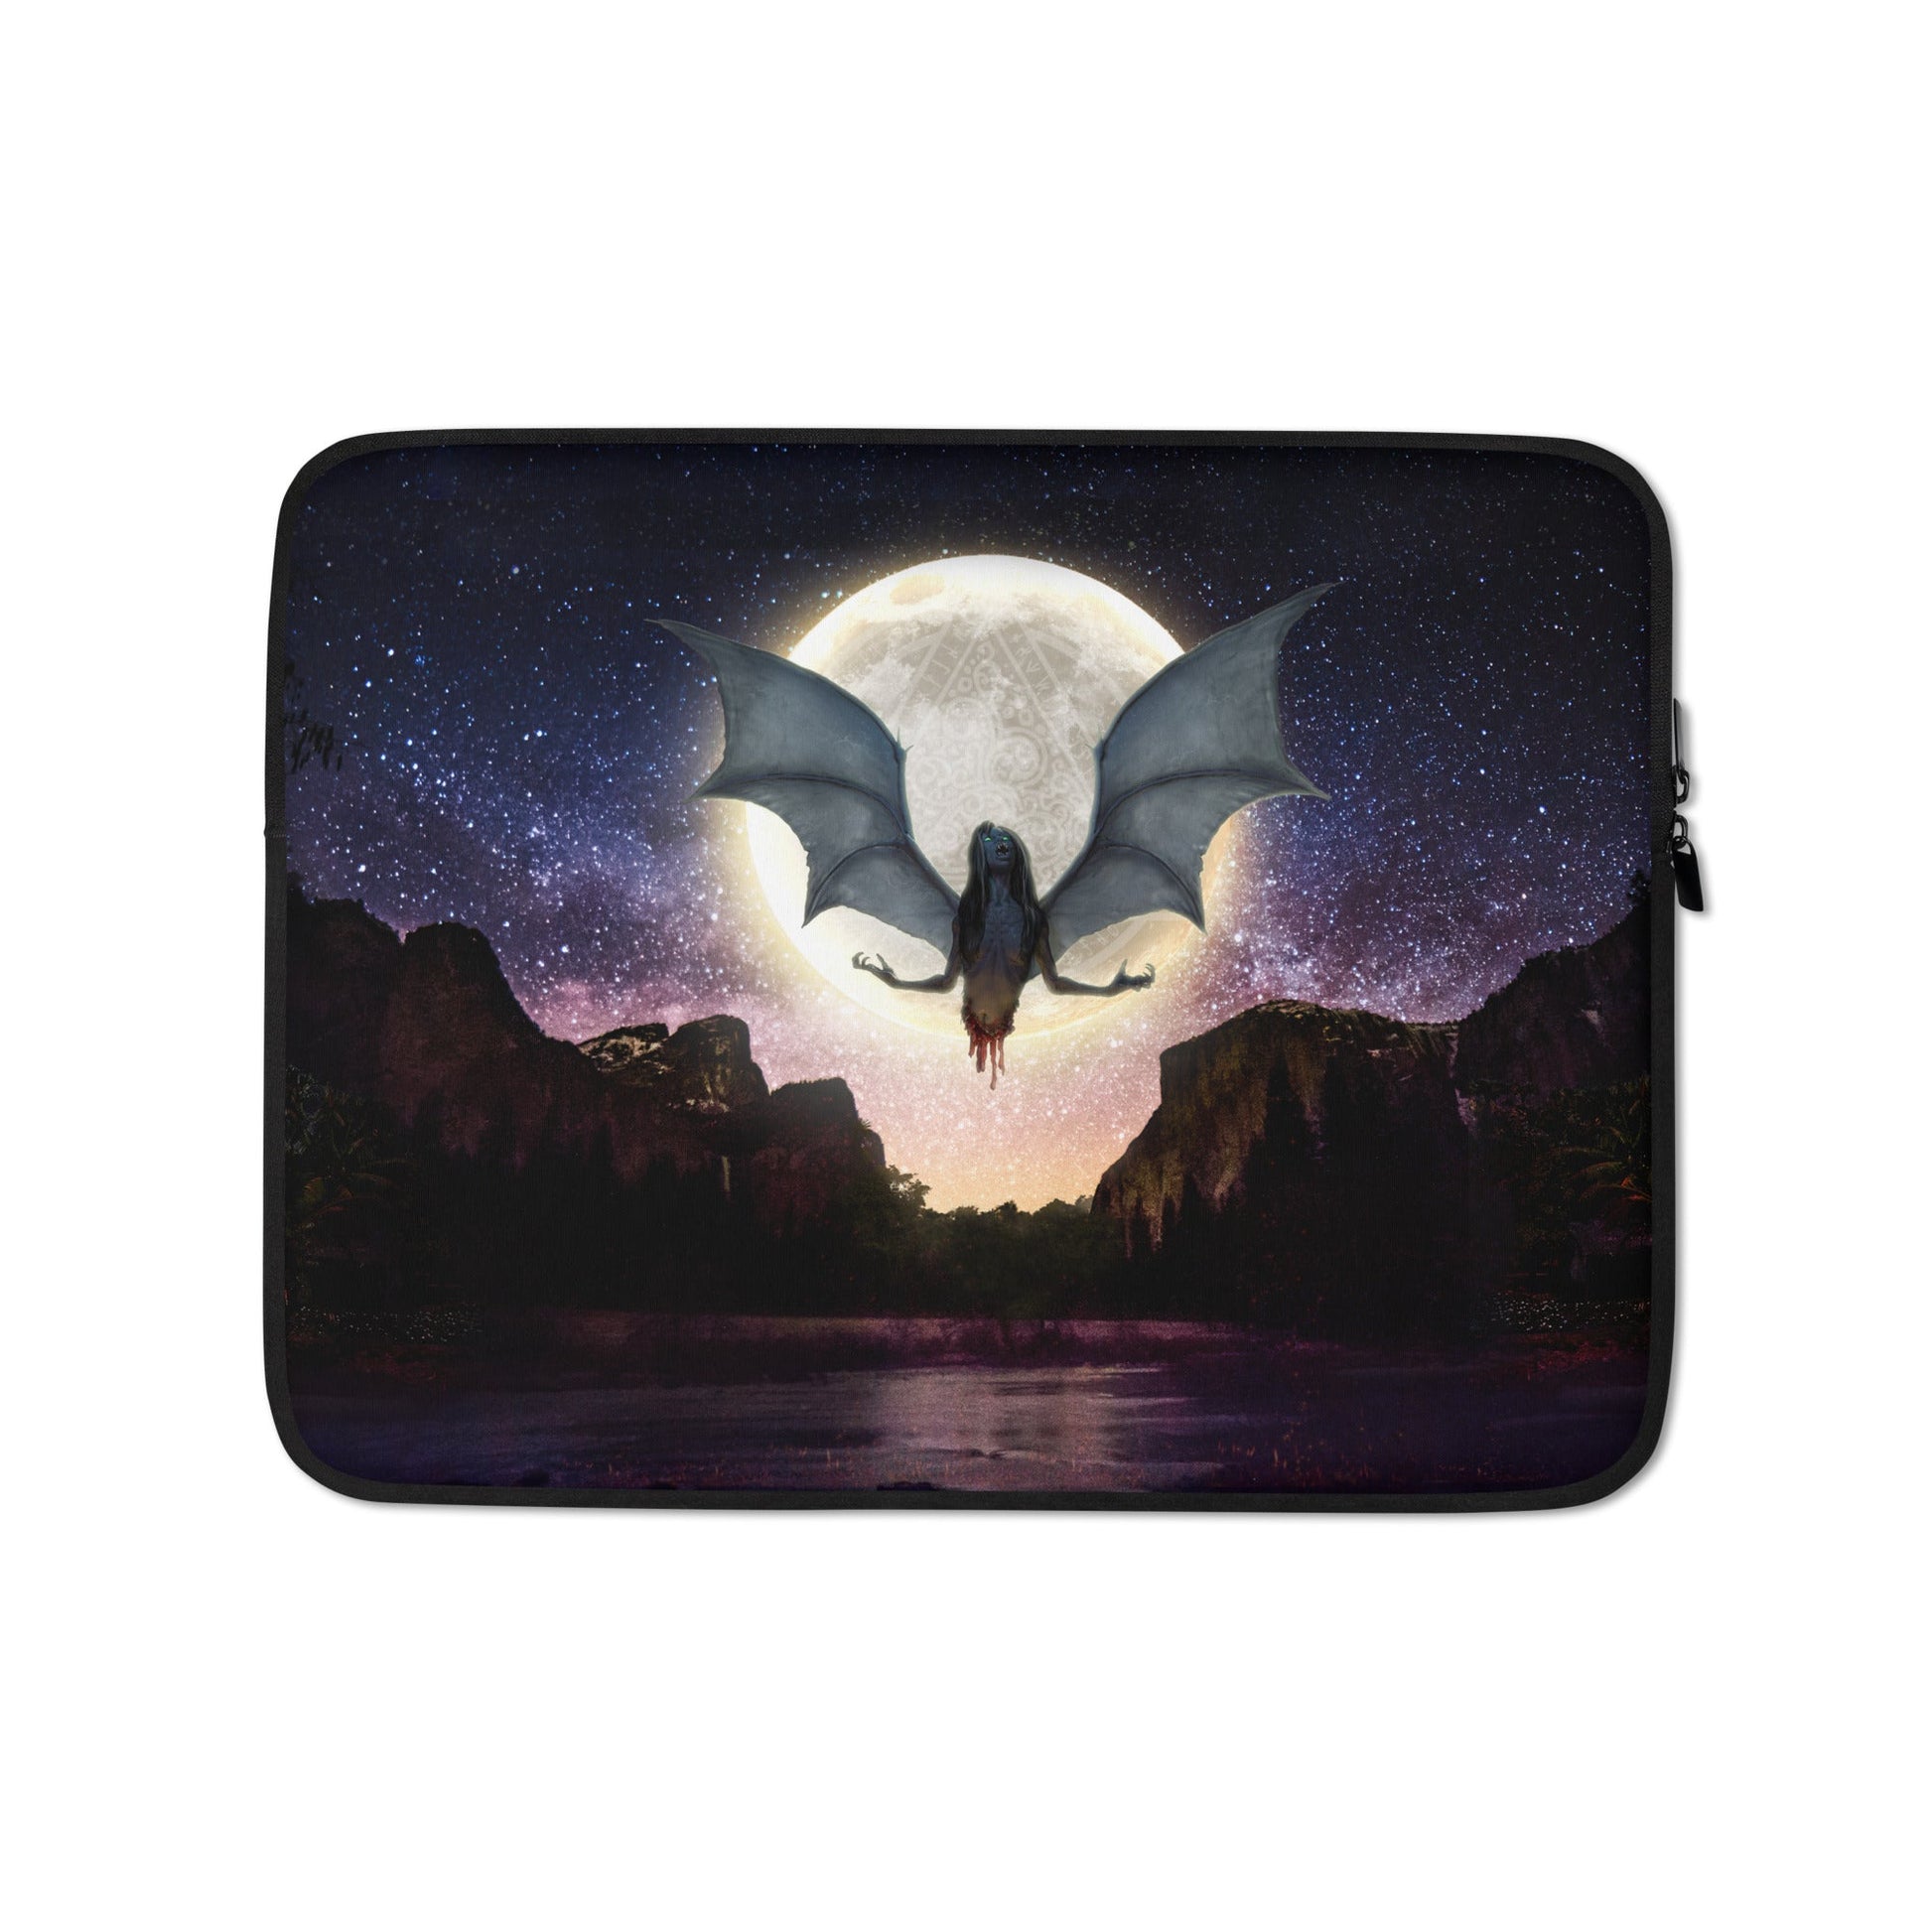 The Baby-Eater Laptop Sleeve (no title) - Spectral Ink Shop - Laptop Sleeve -8035261_10984